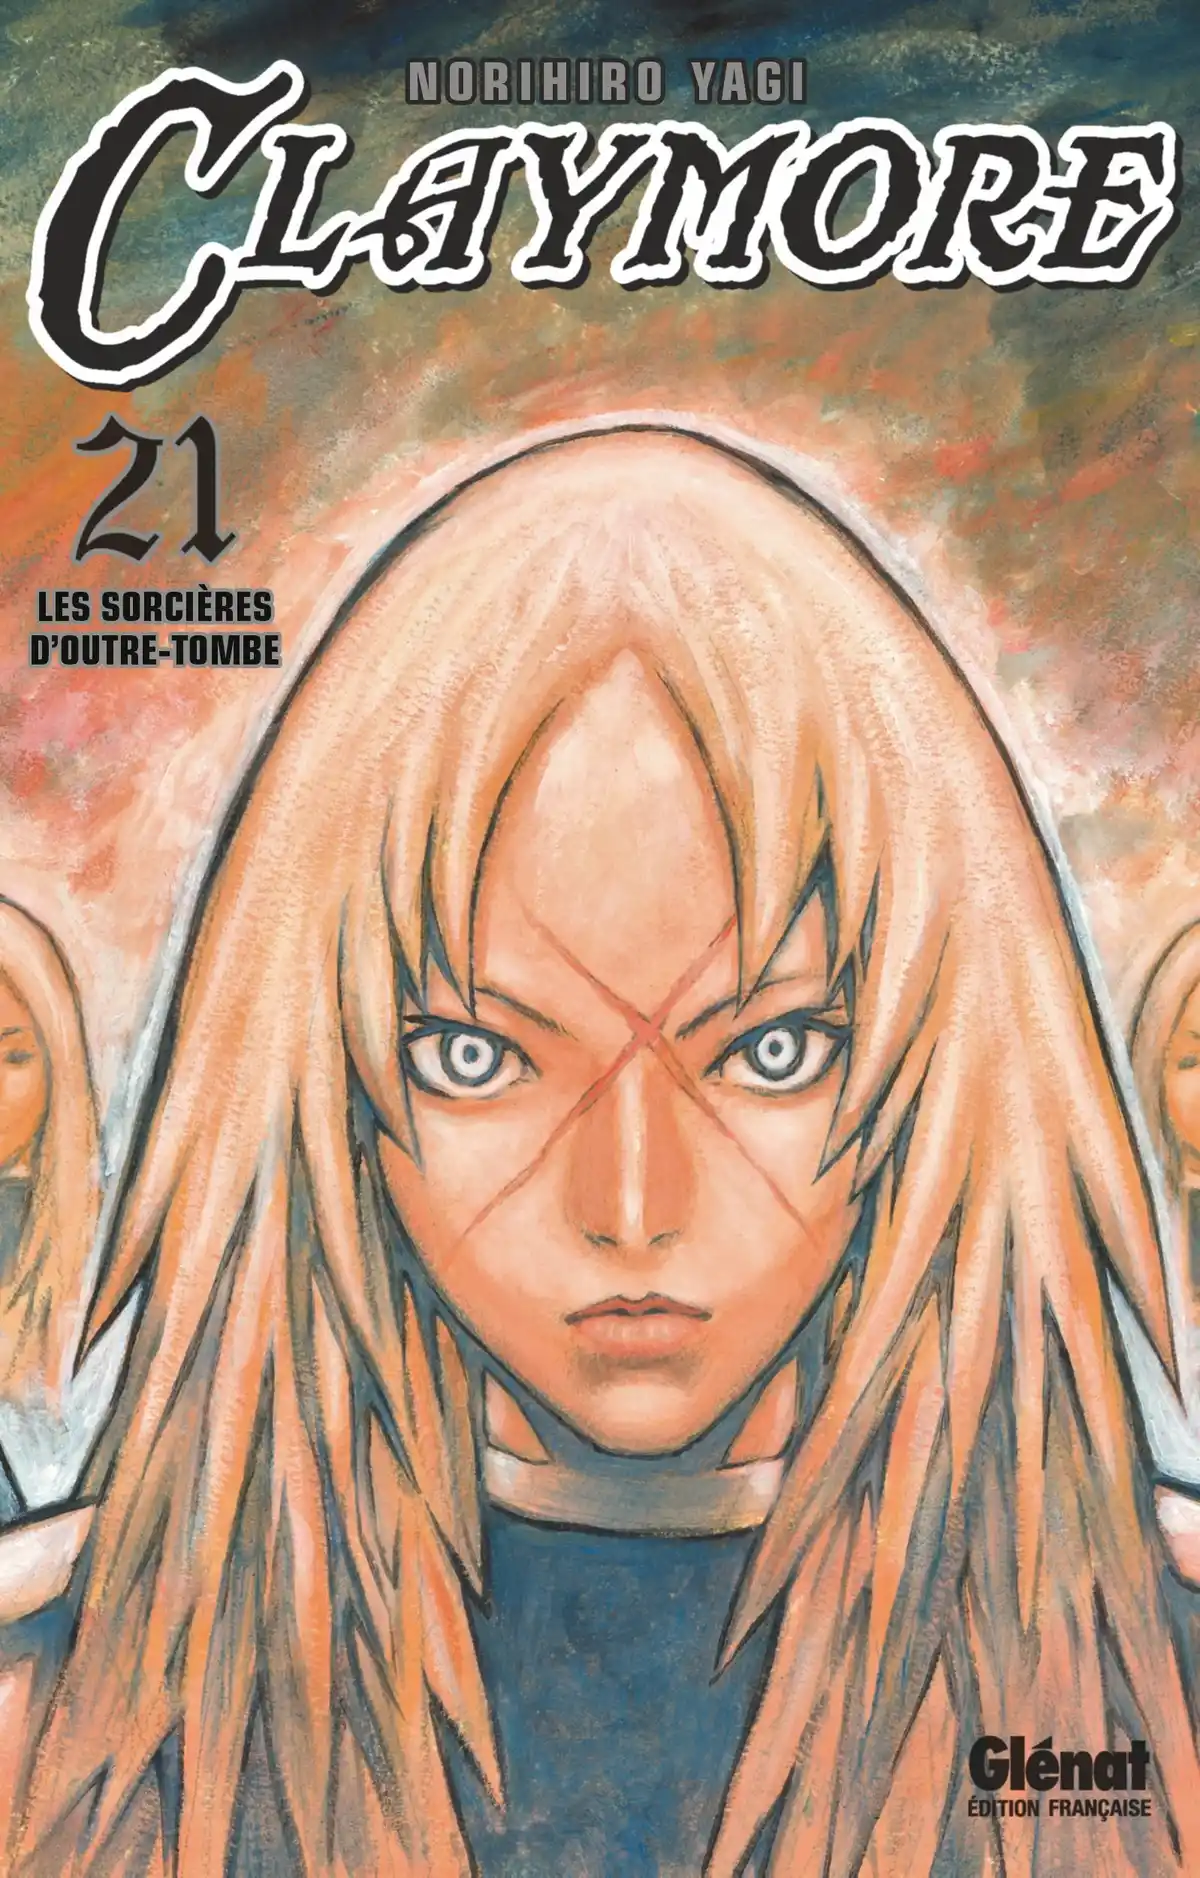 Claymore Volume 21 page 1